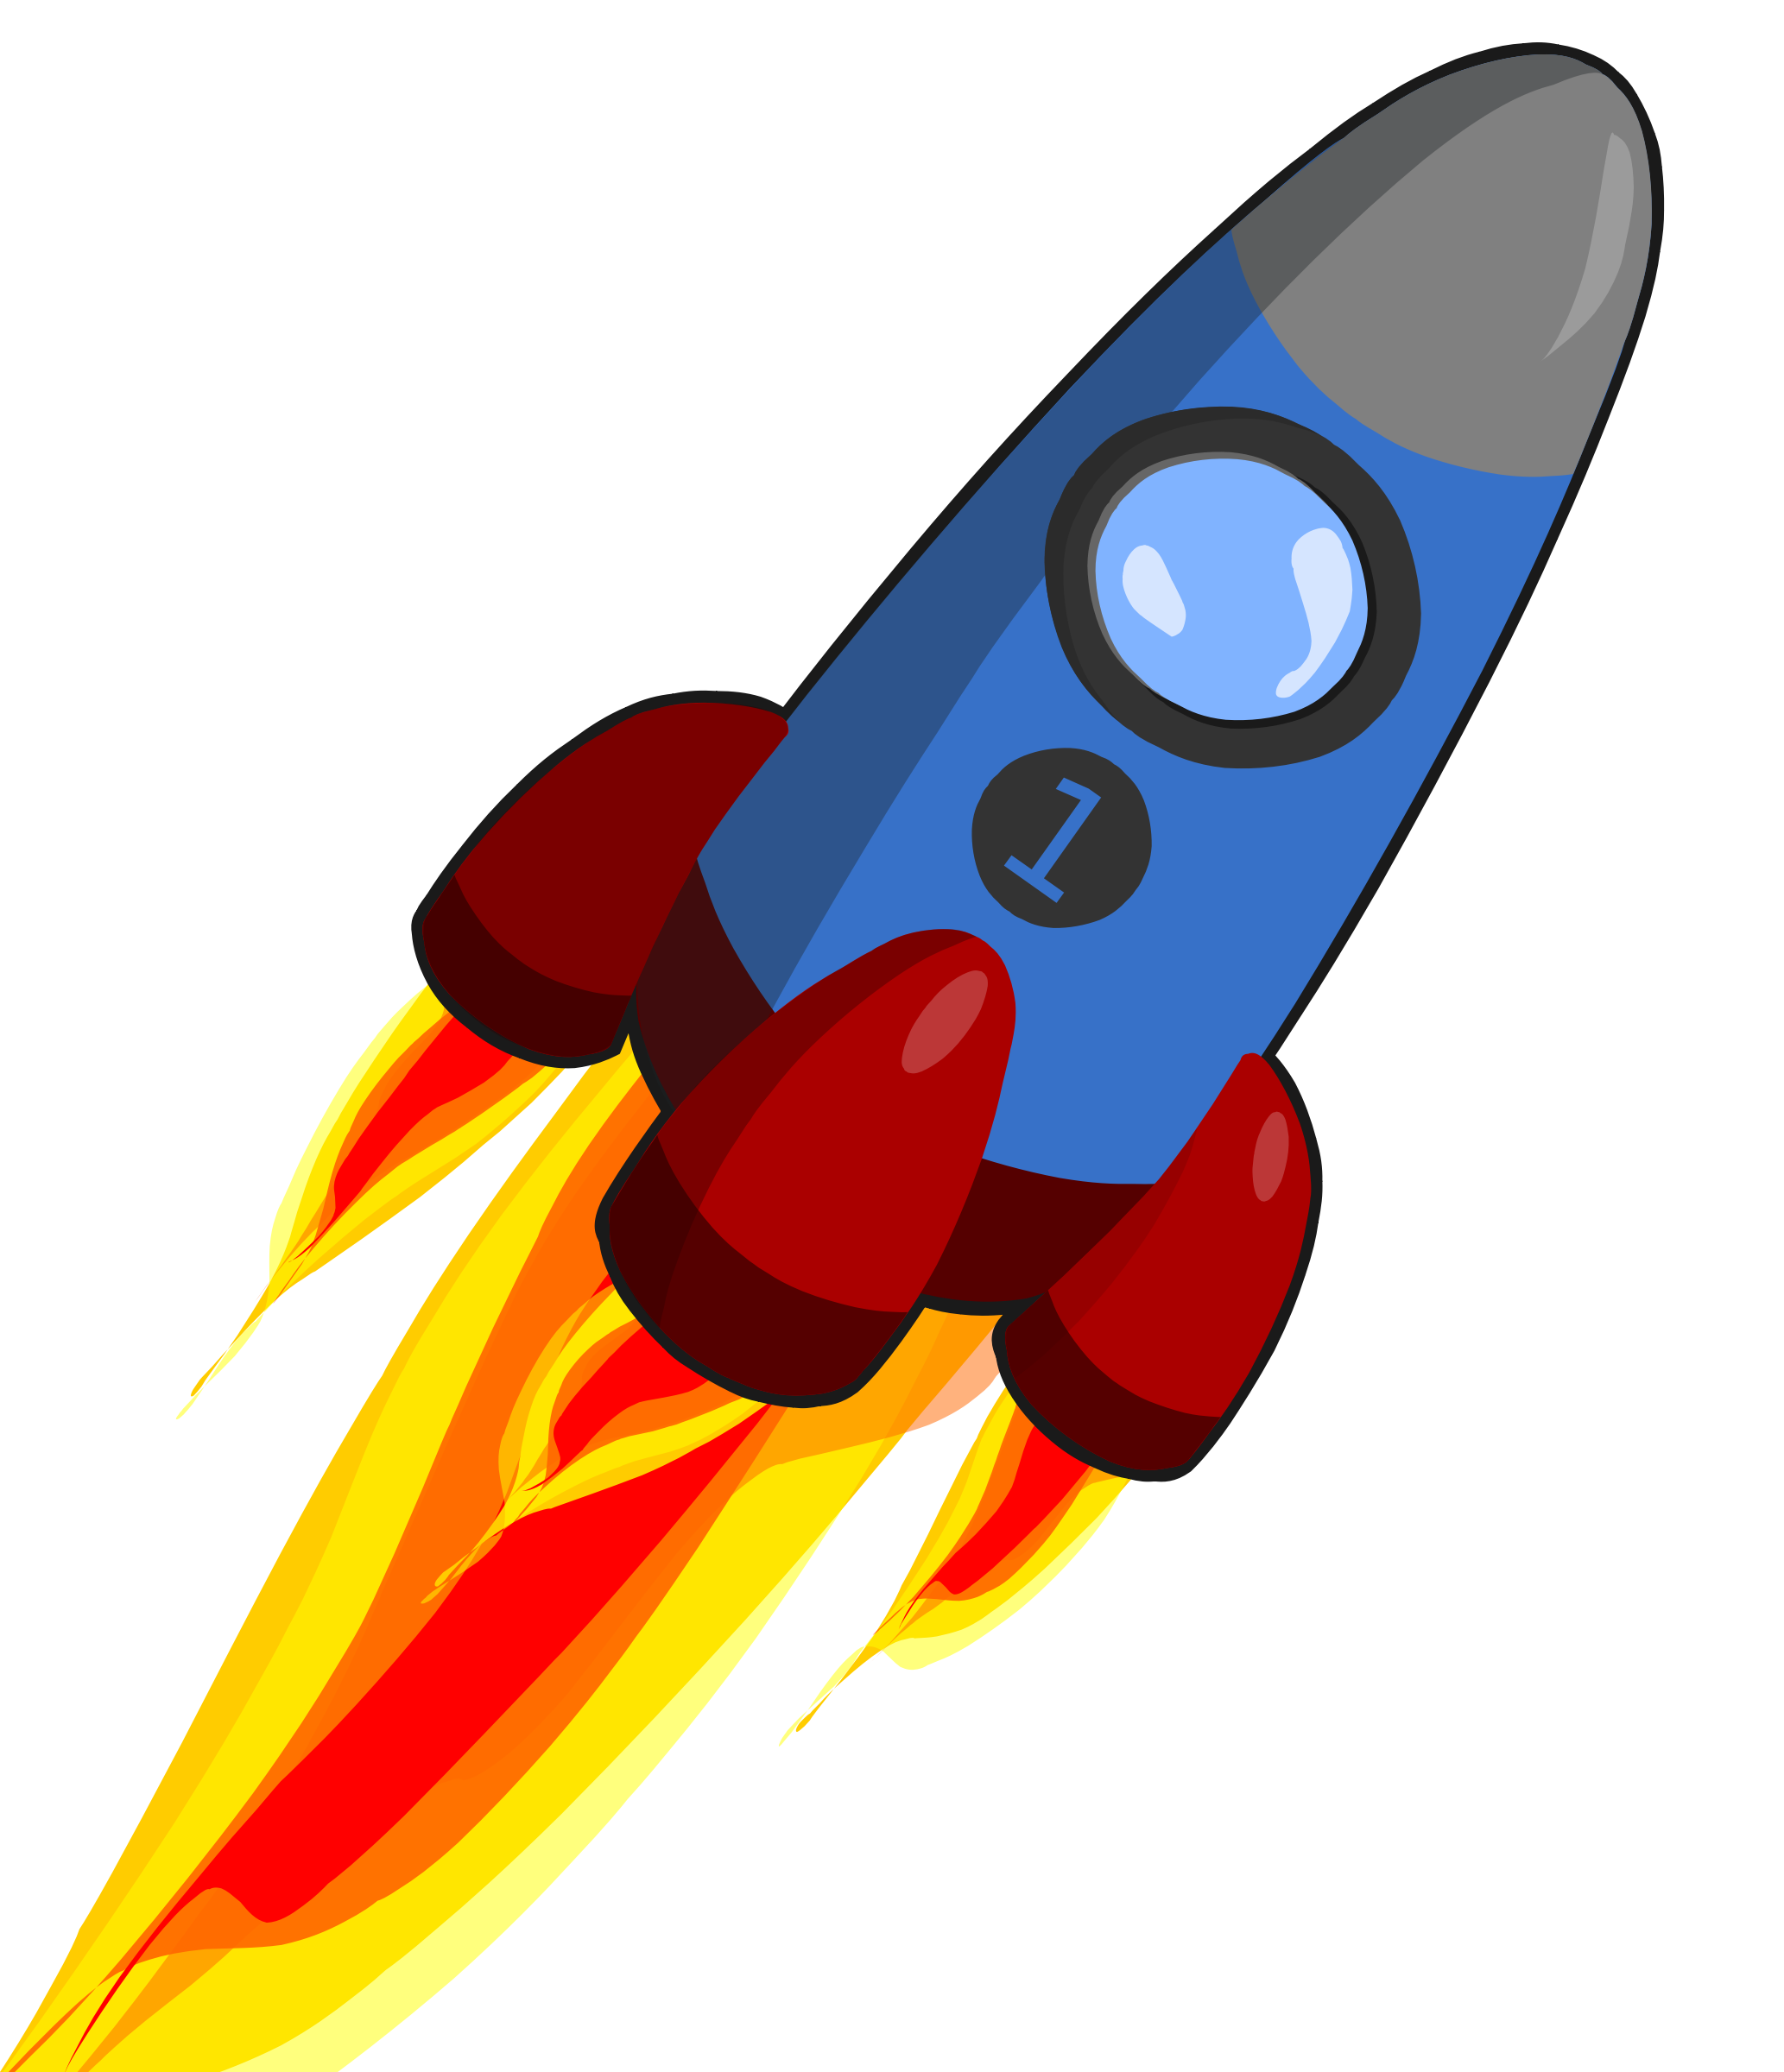 Rocket clipart animated 